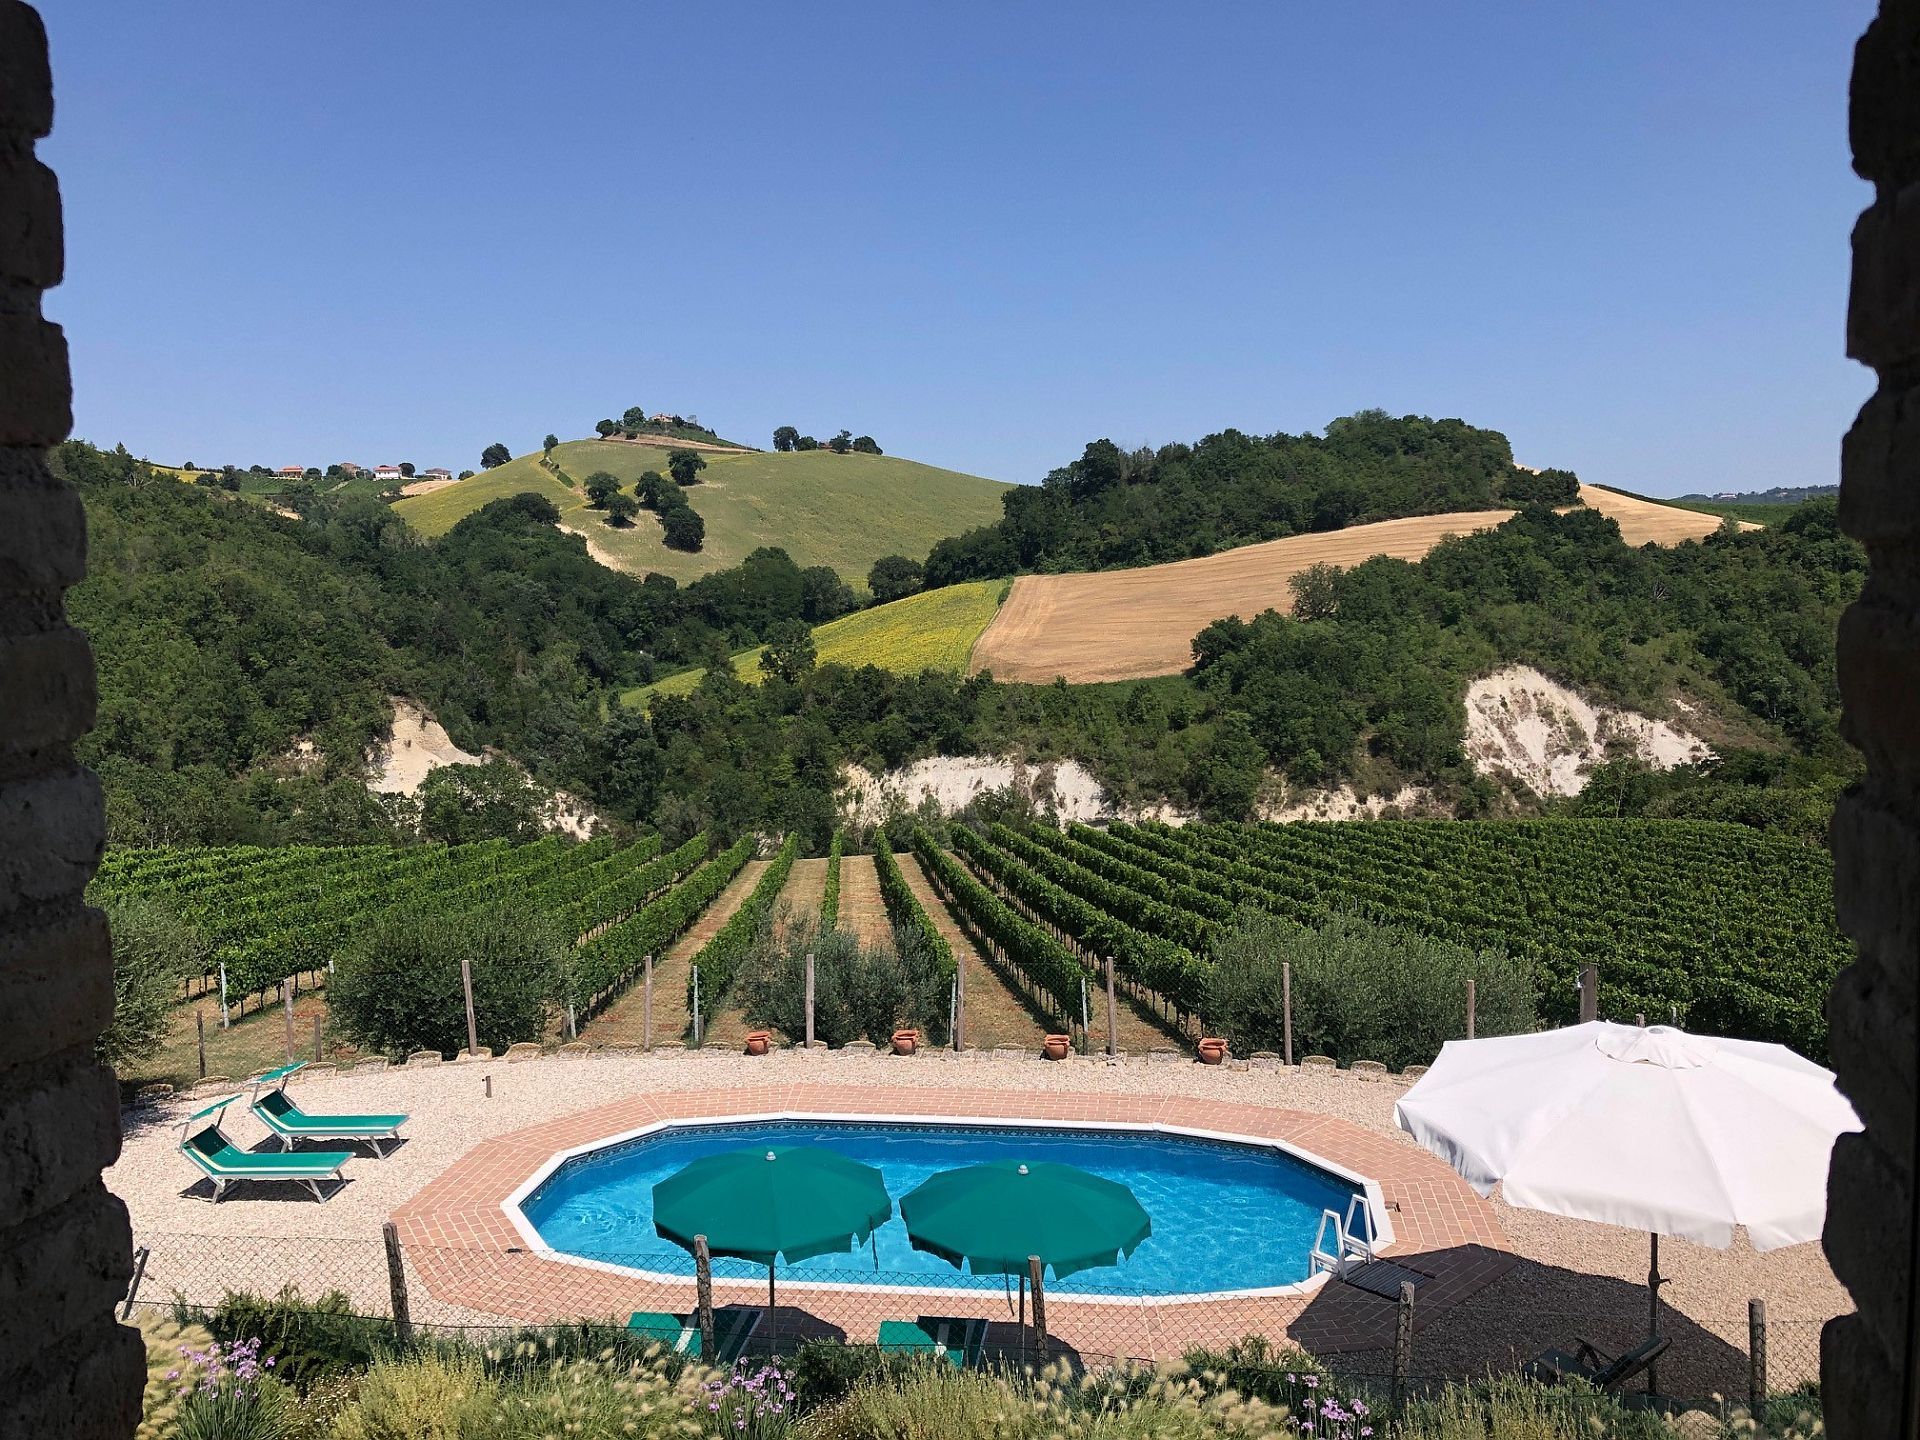 Le Marche eco holiday apartment | Villa in the Vineyard